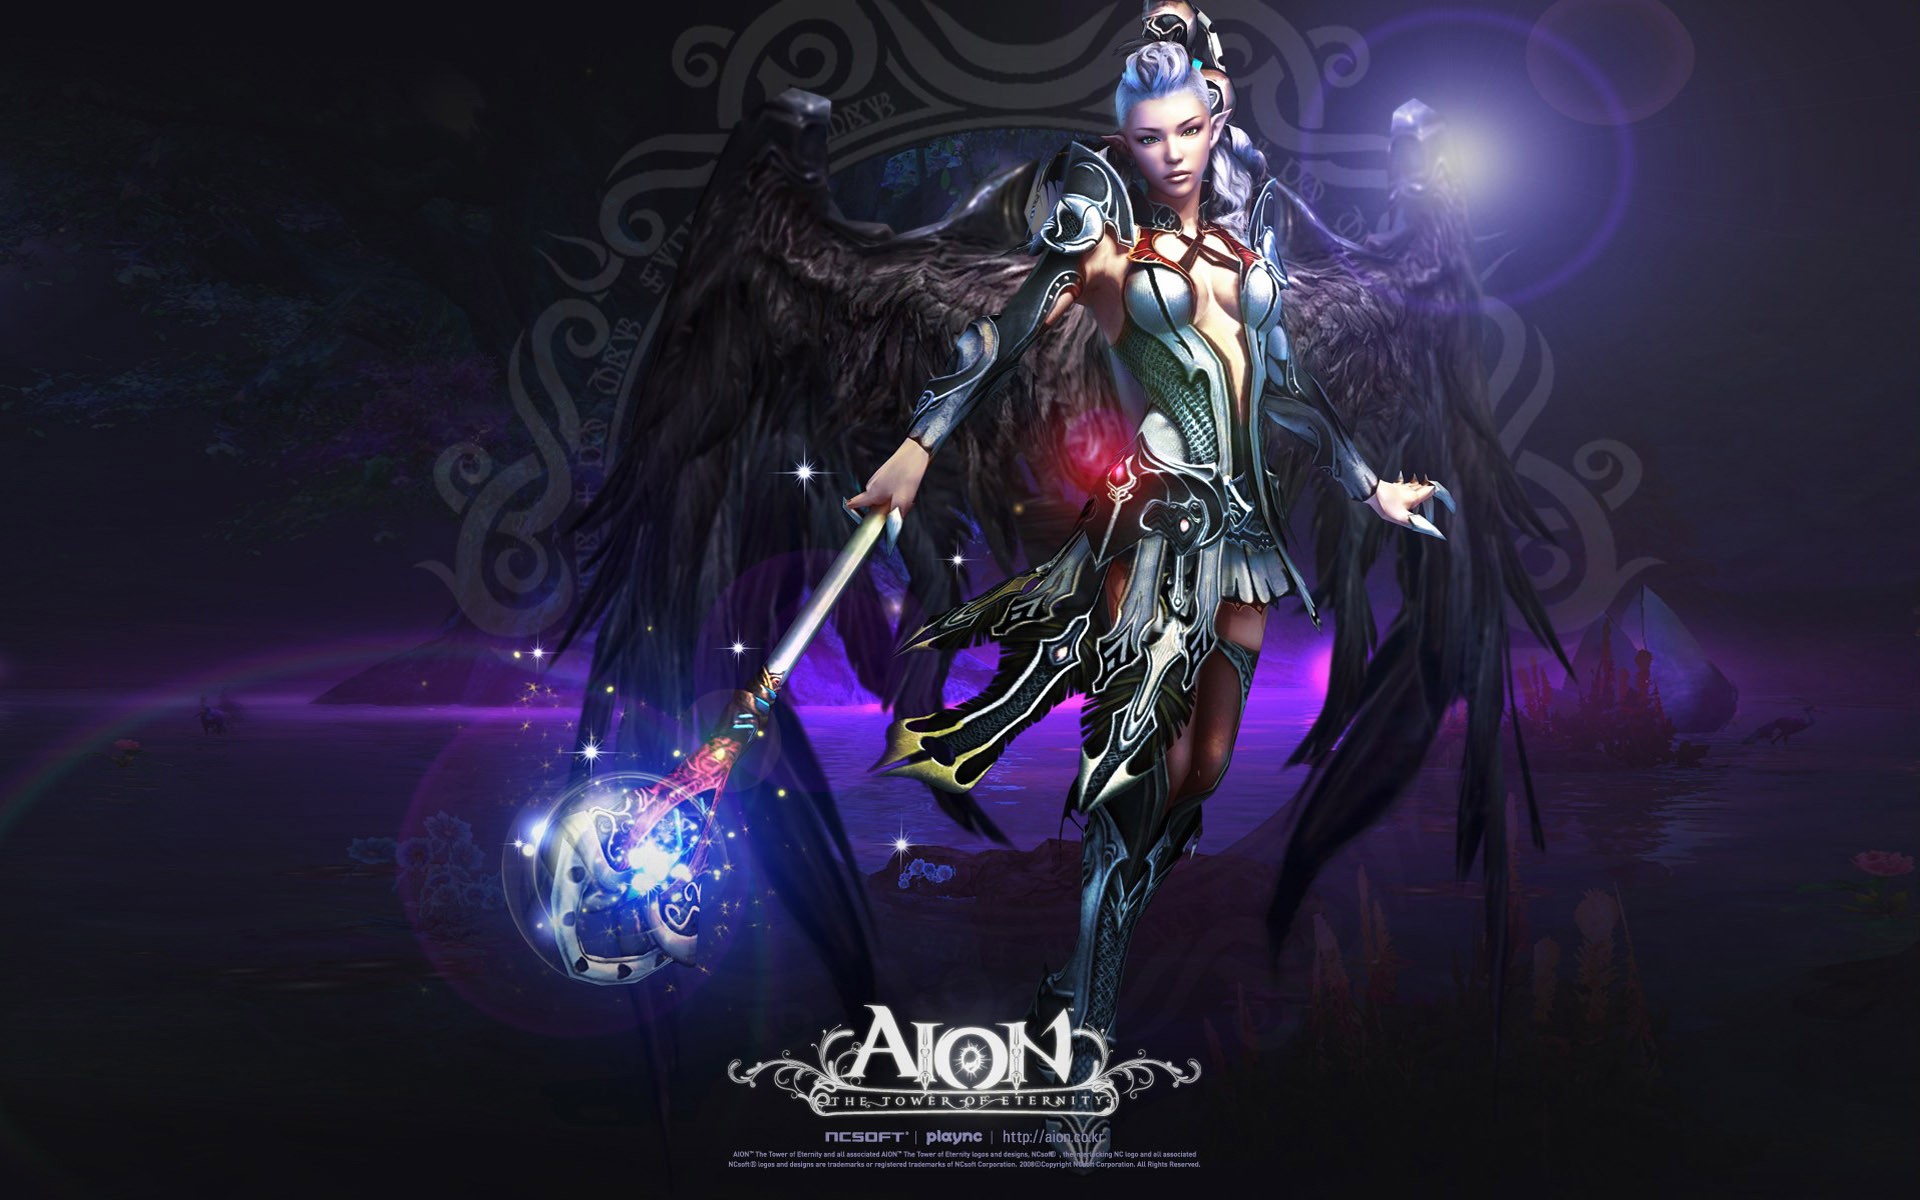 Aion modeling HD gaming wallpapers #17 - 1920x1200